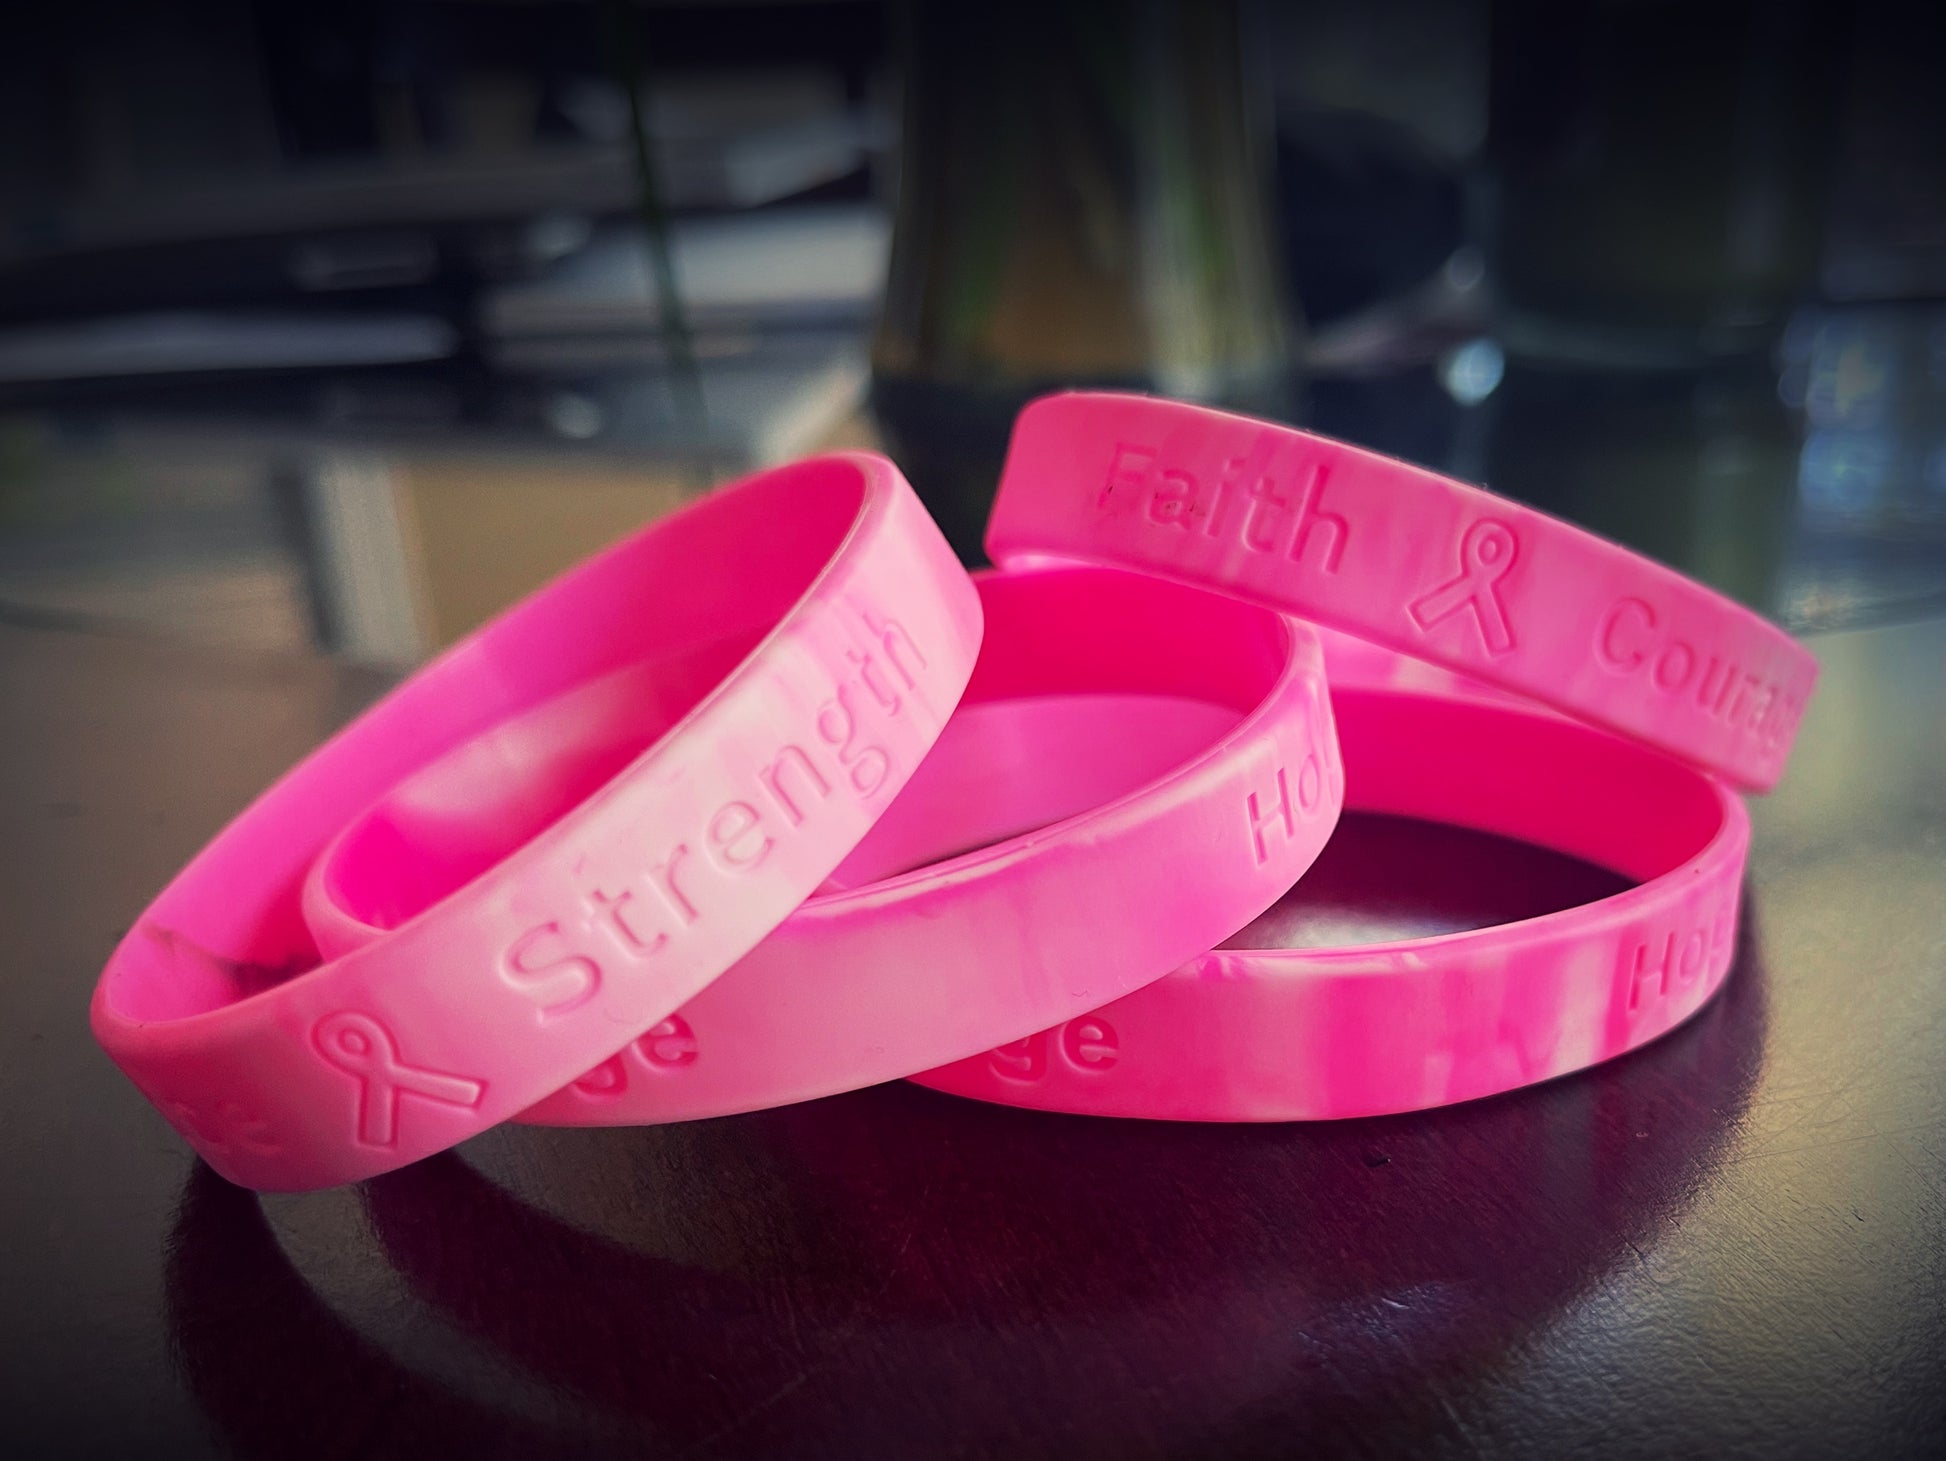 I AM: Thriving Bracelet  Breast Cancer Research Foundation